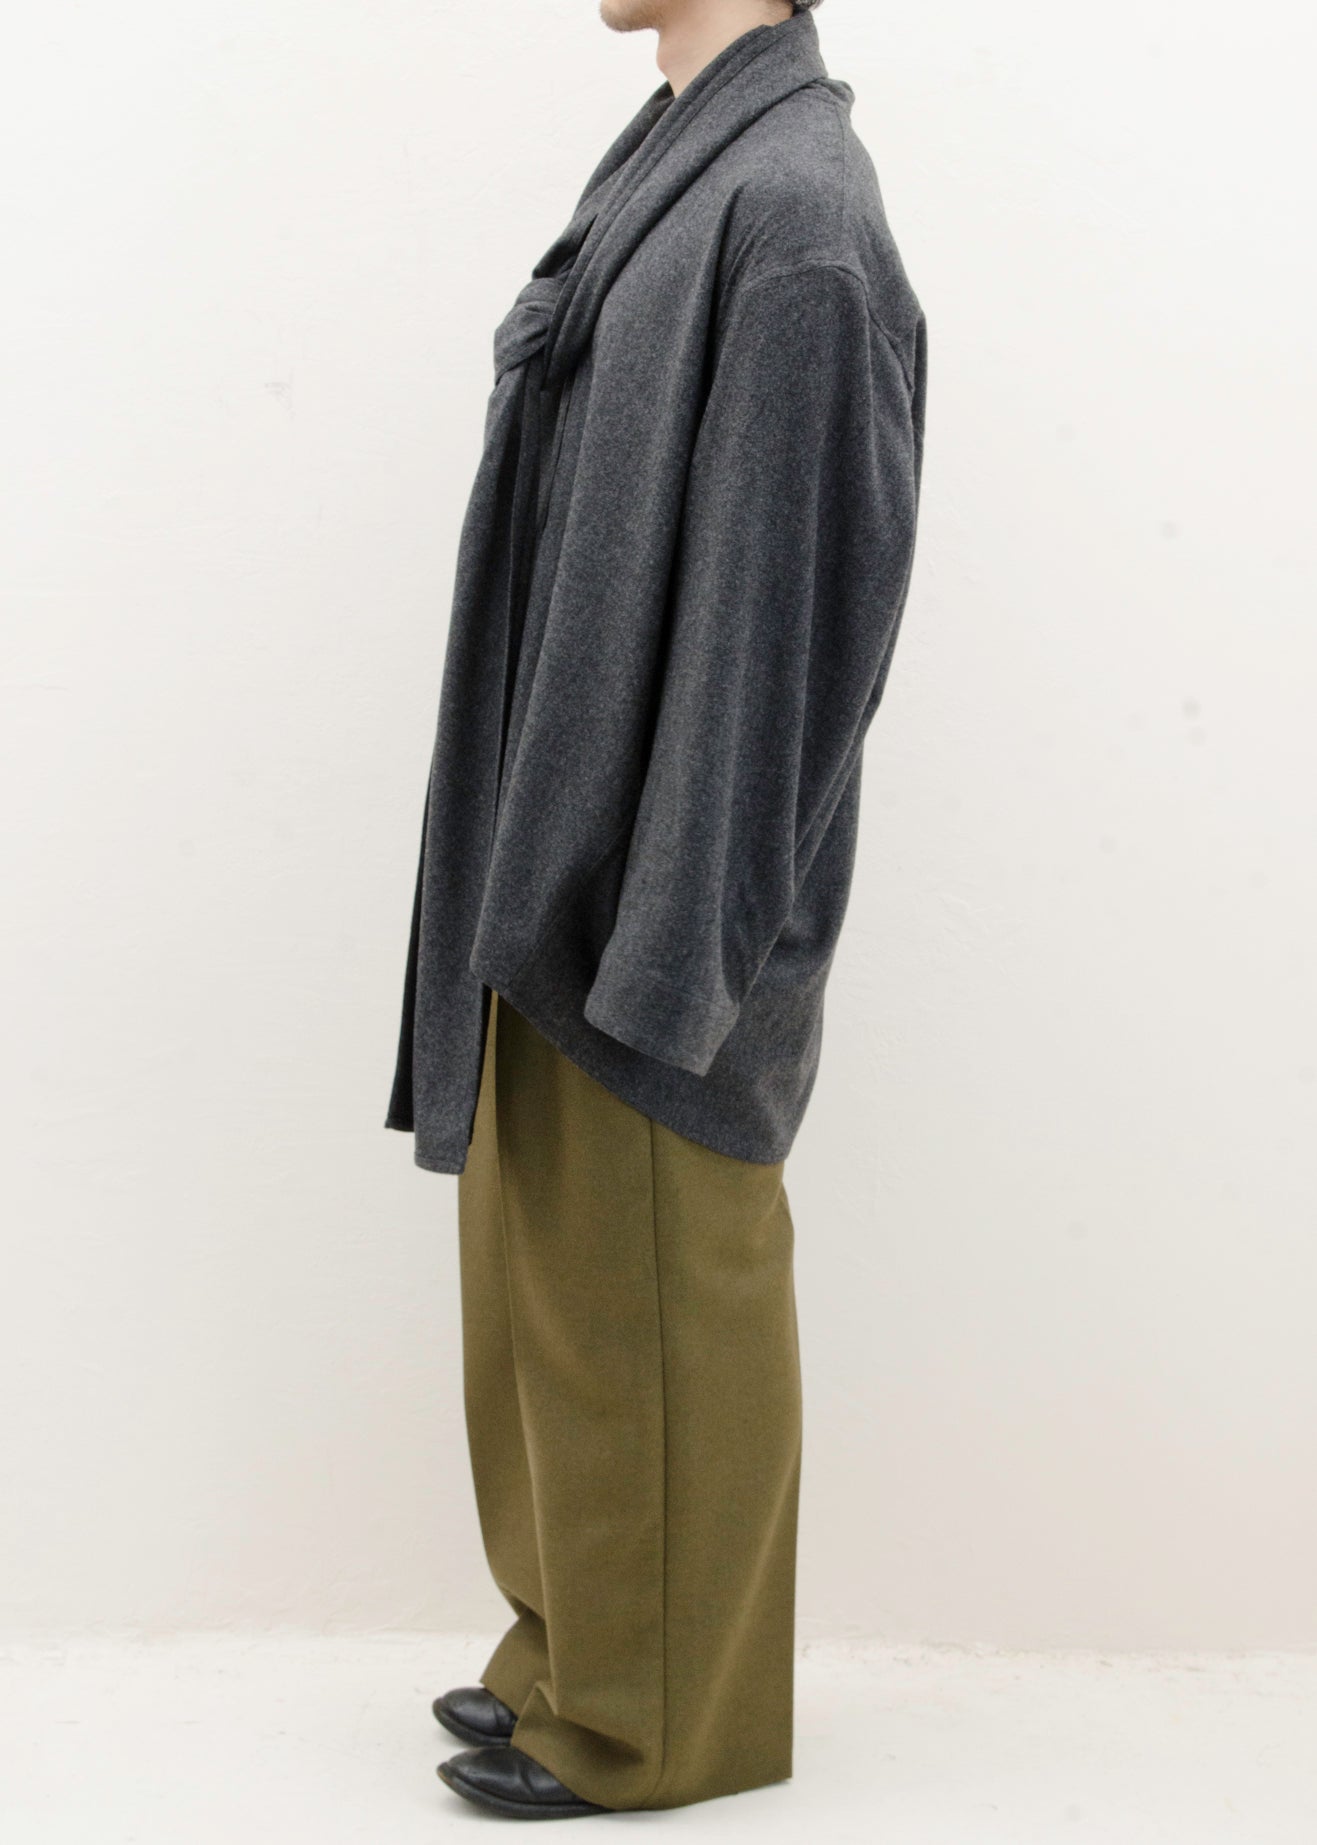 HED MAYNER SCARF COLLAR SHIRT / GRAY FLANNEL